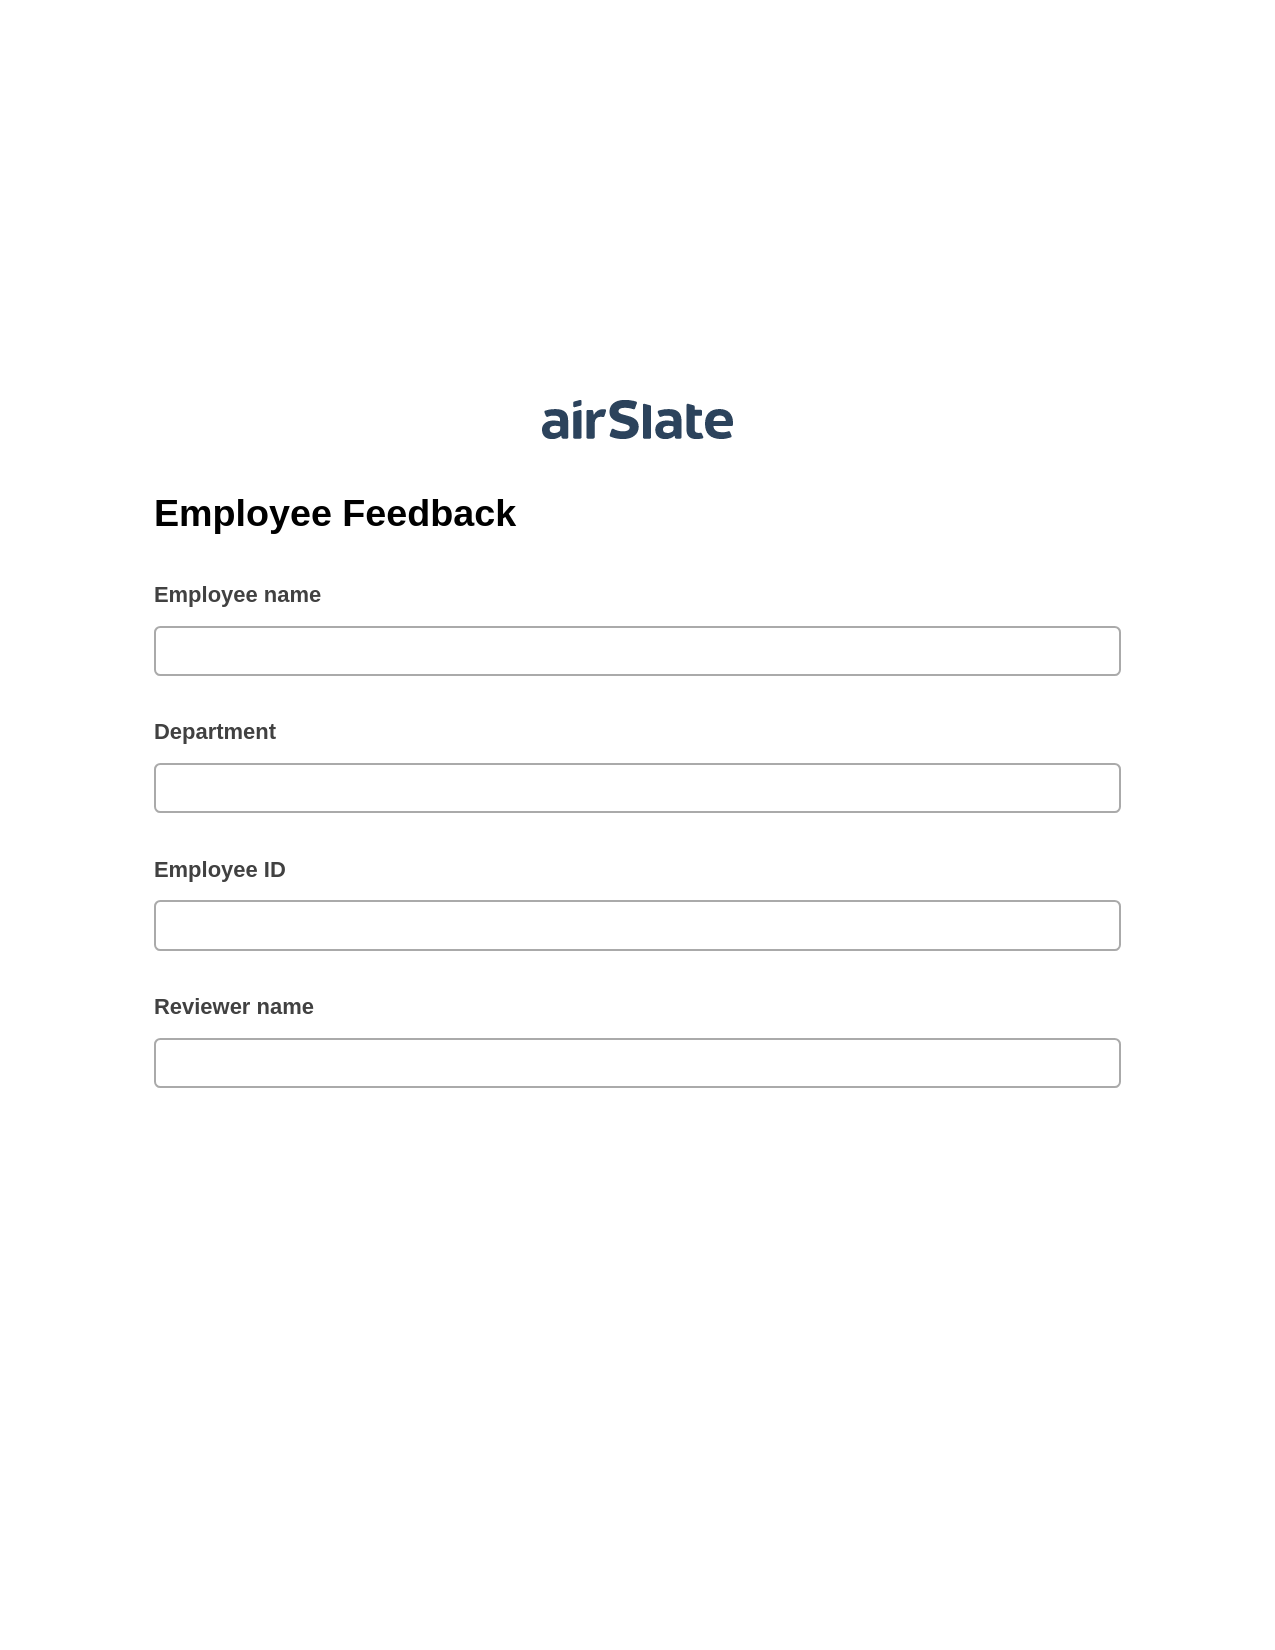 Employee Feedback Pre-fill from CSV File Bot, Add Tags to Slate Bot, Export to Excel 365 Bot